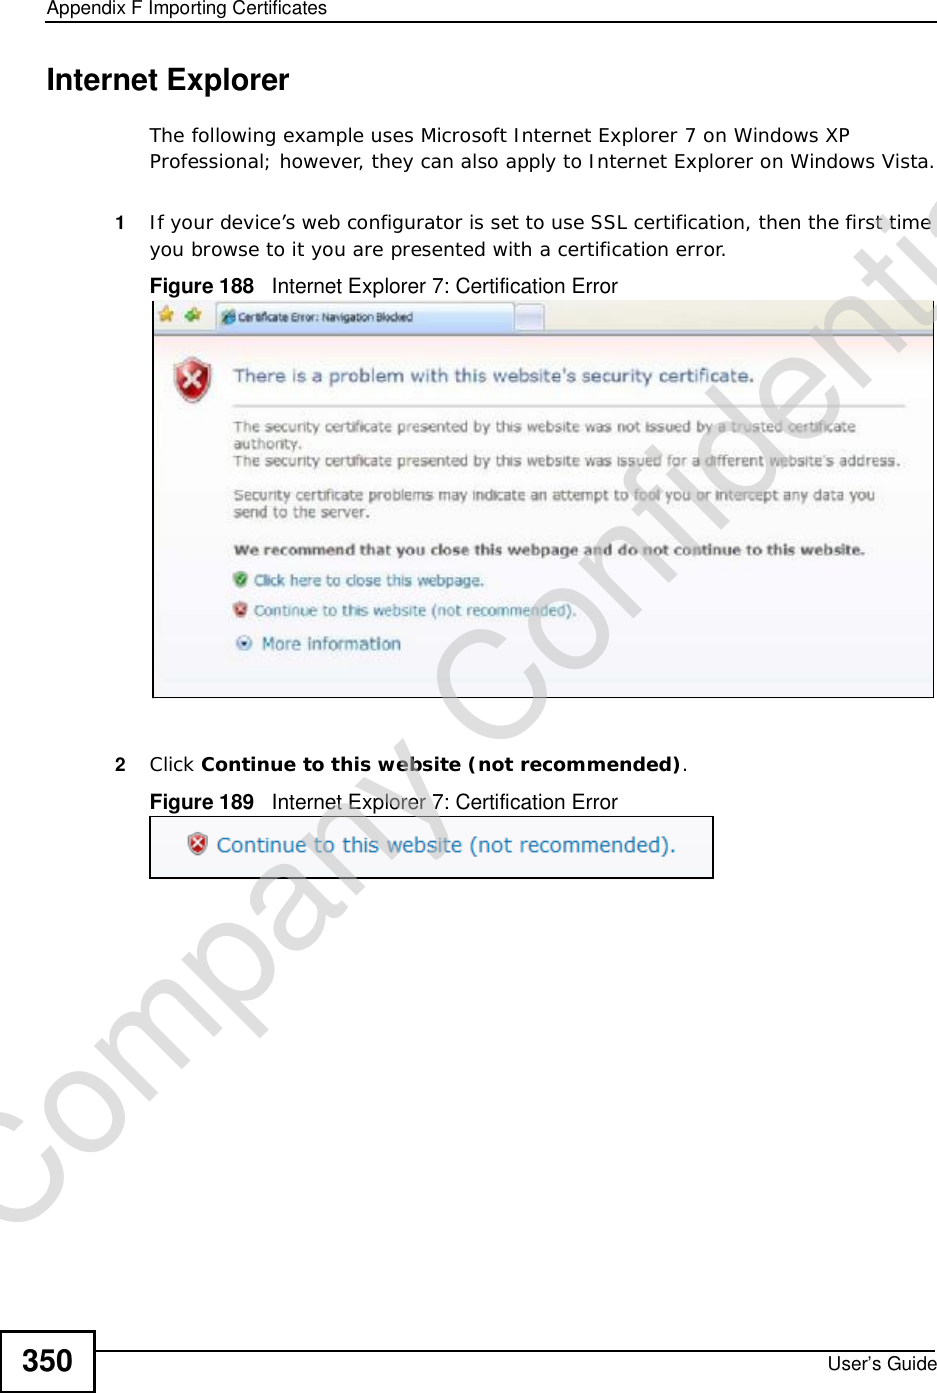 Appendix FImporting CertificatesUser’s Guide350Internet ExplorerThe following example uses Microsoft Internet Explorer 7 on Windows XP Professional; however, they can also apply to Internet Explorer on Windows Vista.1If your device’s web configurator is set to use SSL certification, then the first time you browse to it you are presented with a certification error.Figure 188   Internet Explorer 7: Certification Error2Click Continue to this website (not recommended).Figure 189   Internet Explorer 7: Certification ErrorCompany Confidential